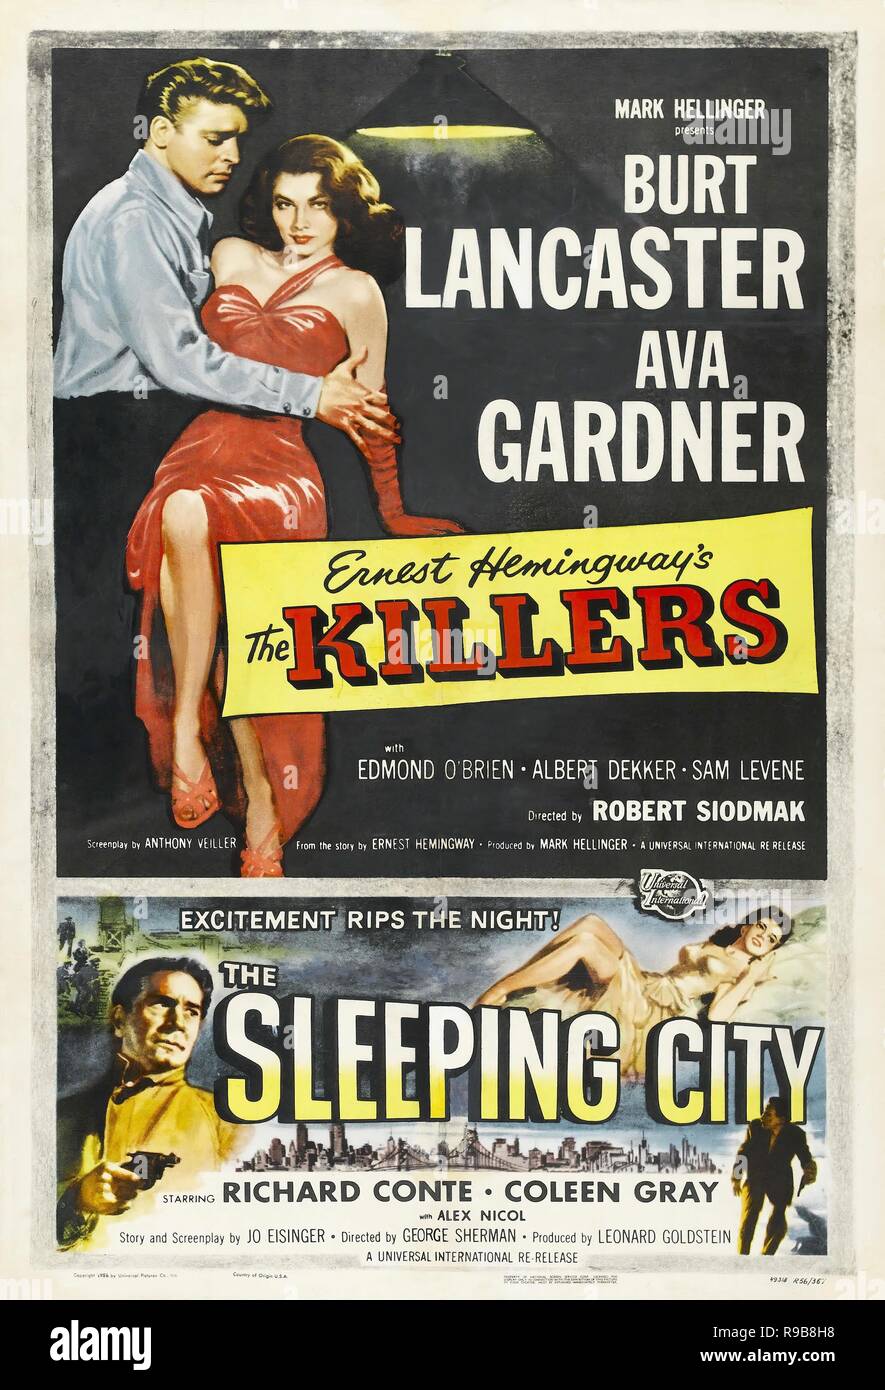 Original film title: THE KILLERS. English title: THE KILLERS. Year: 1946. Director: ROBERT SIODMAK. Credit: UNIVERSAL PICTURES / Album Stock Photo